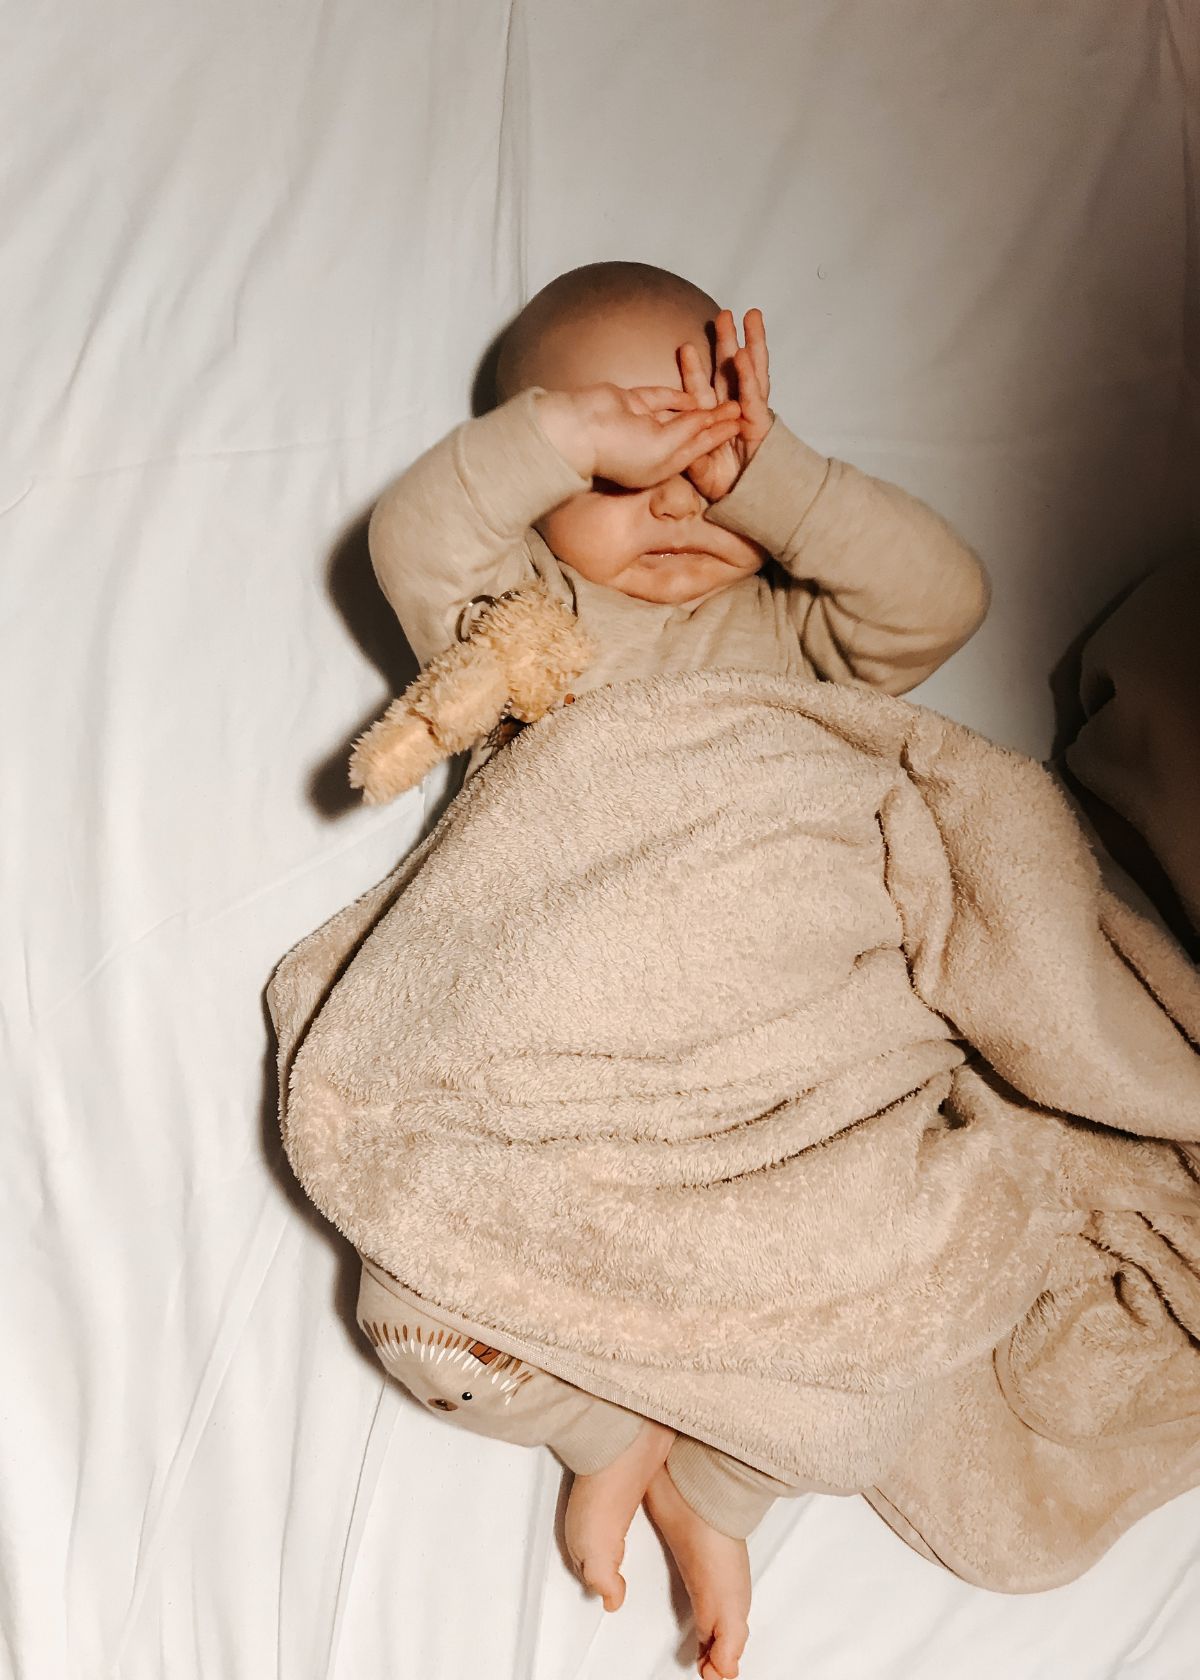 Are Weighted Sleep Sacks Safe for Infants